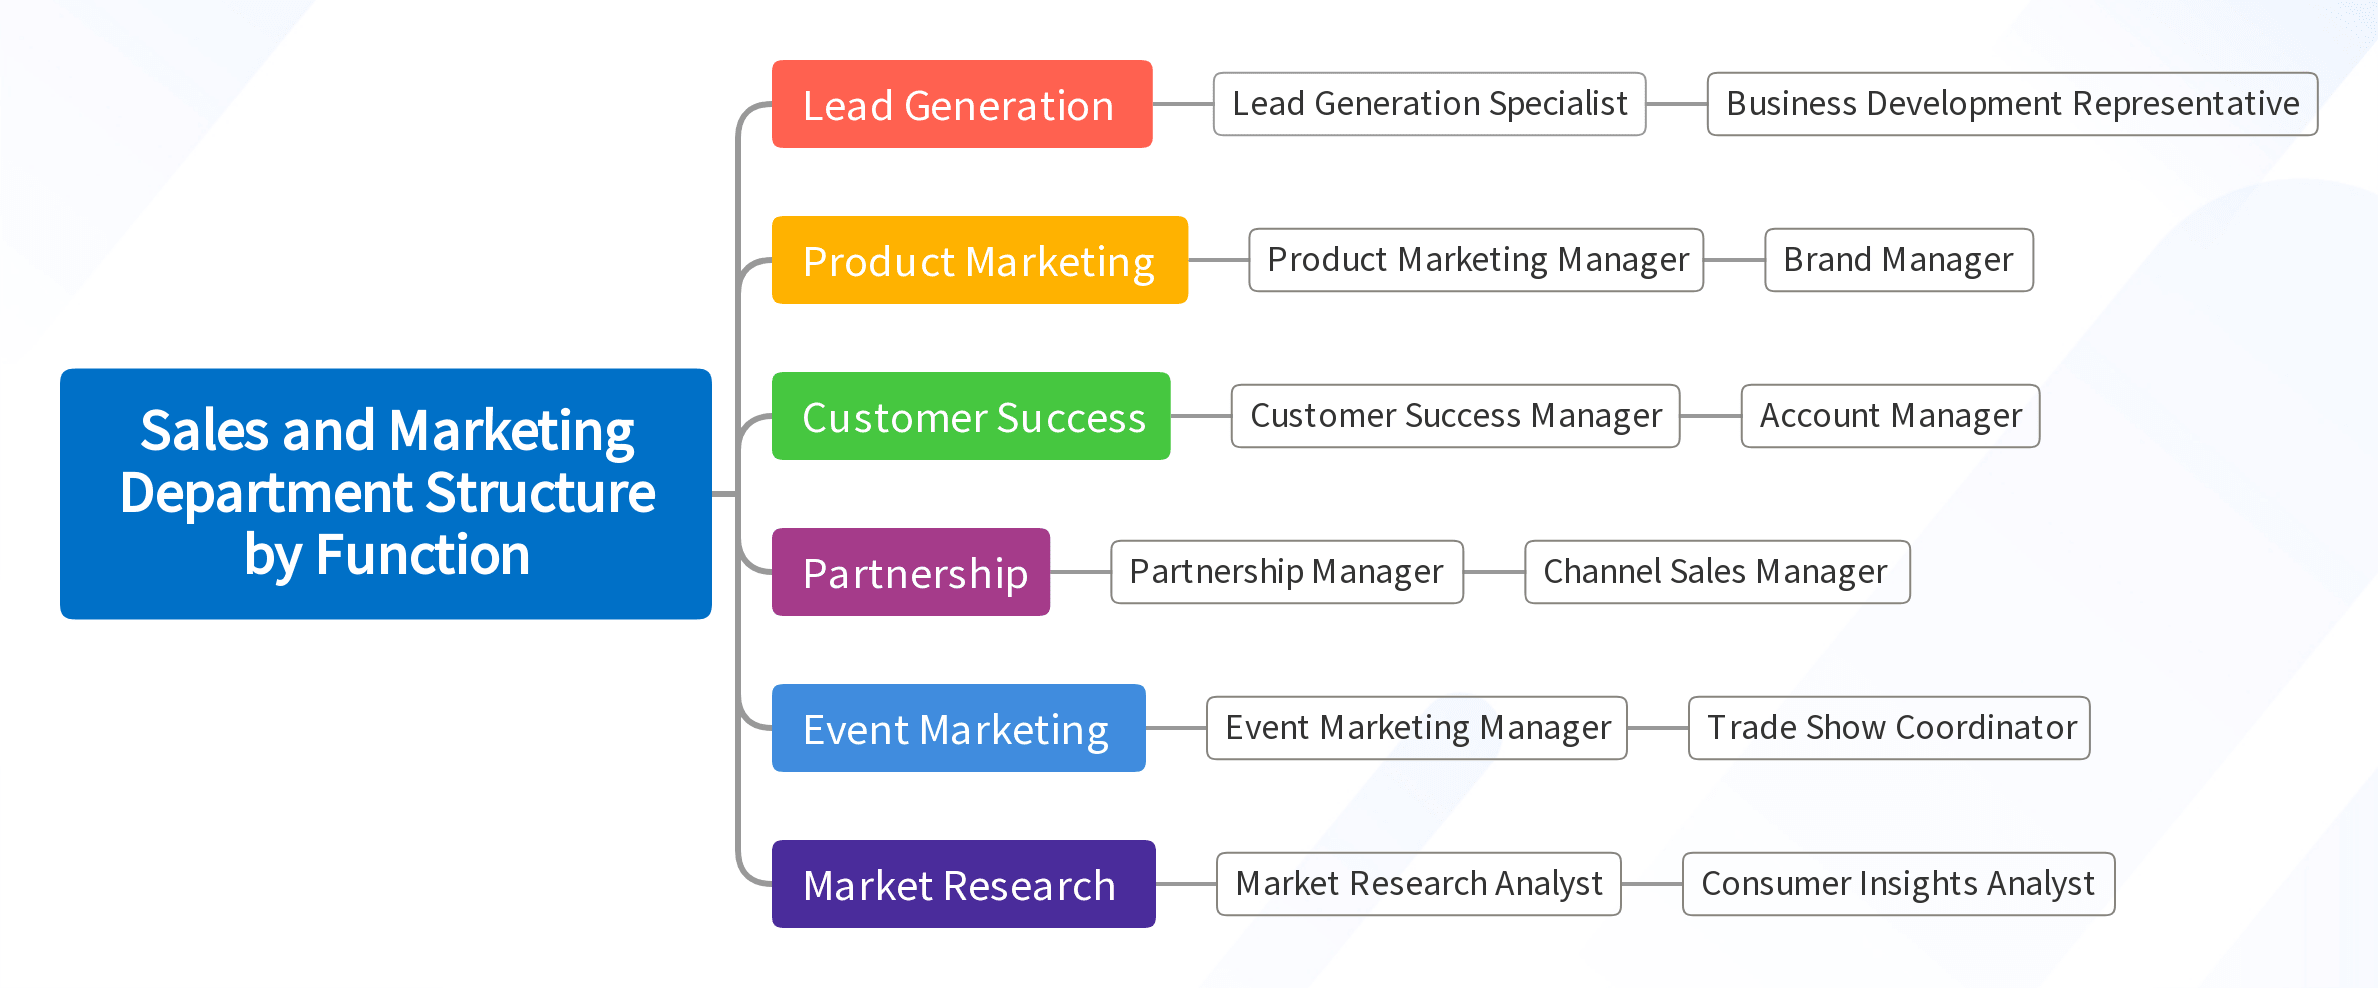 Sales and Marketing Department Structure by Function